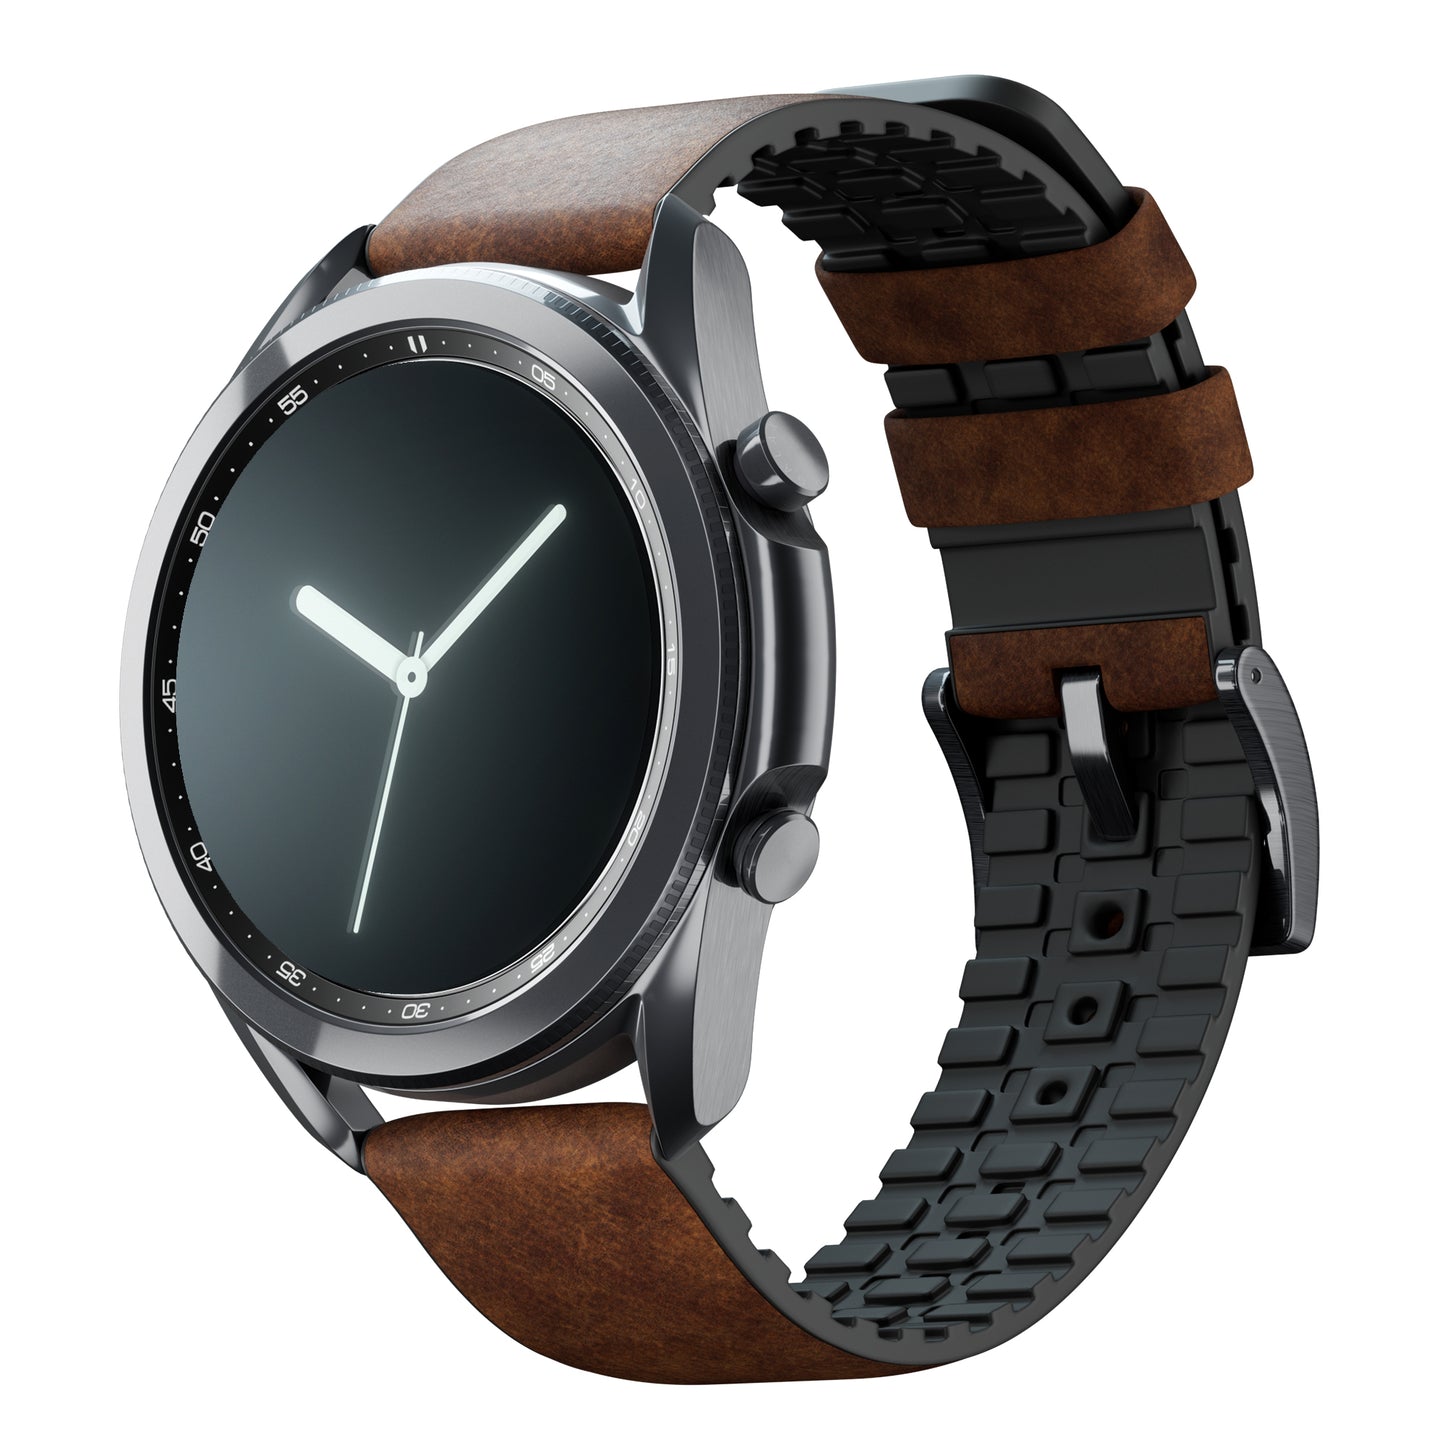 Samsung Galaxy Watch3 | Leather and Rubber Hybrid | Oak Brown - Barton Watch Bands